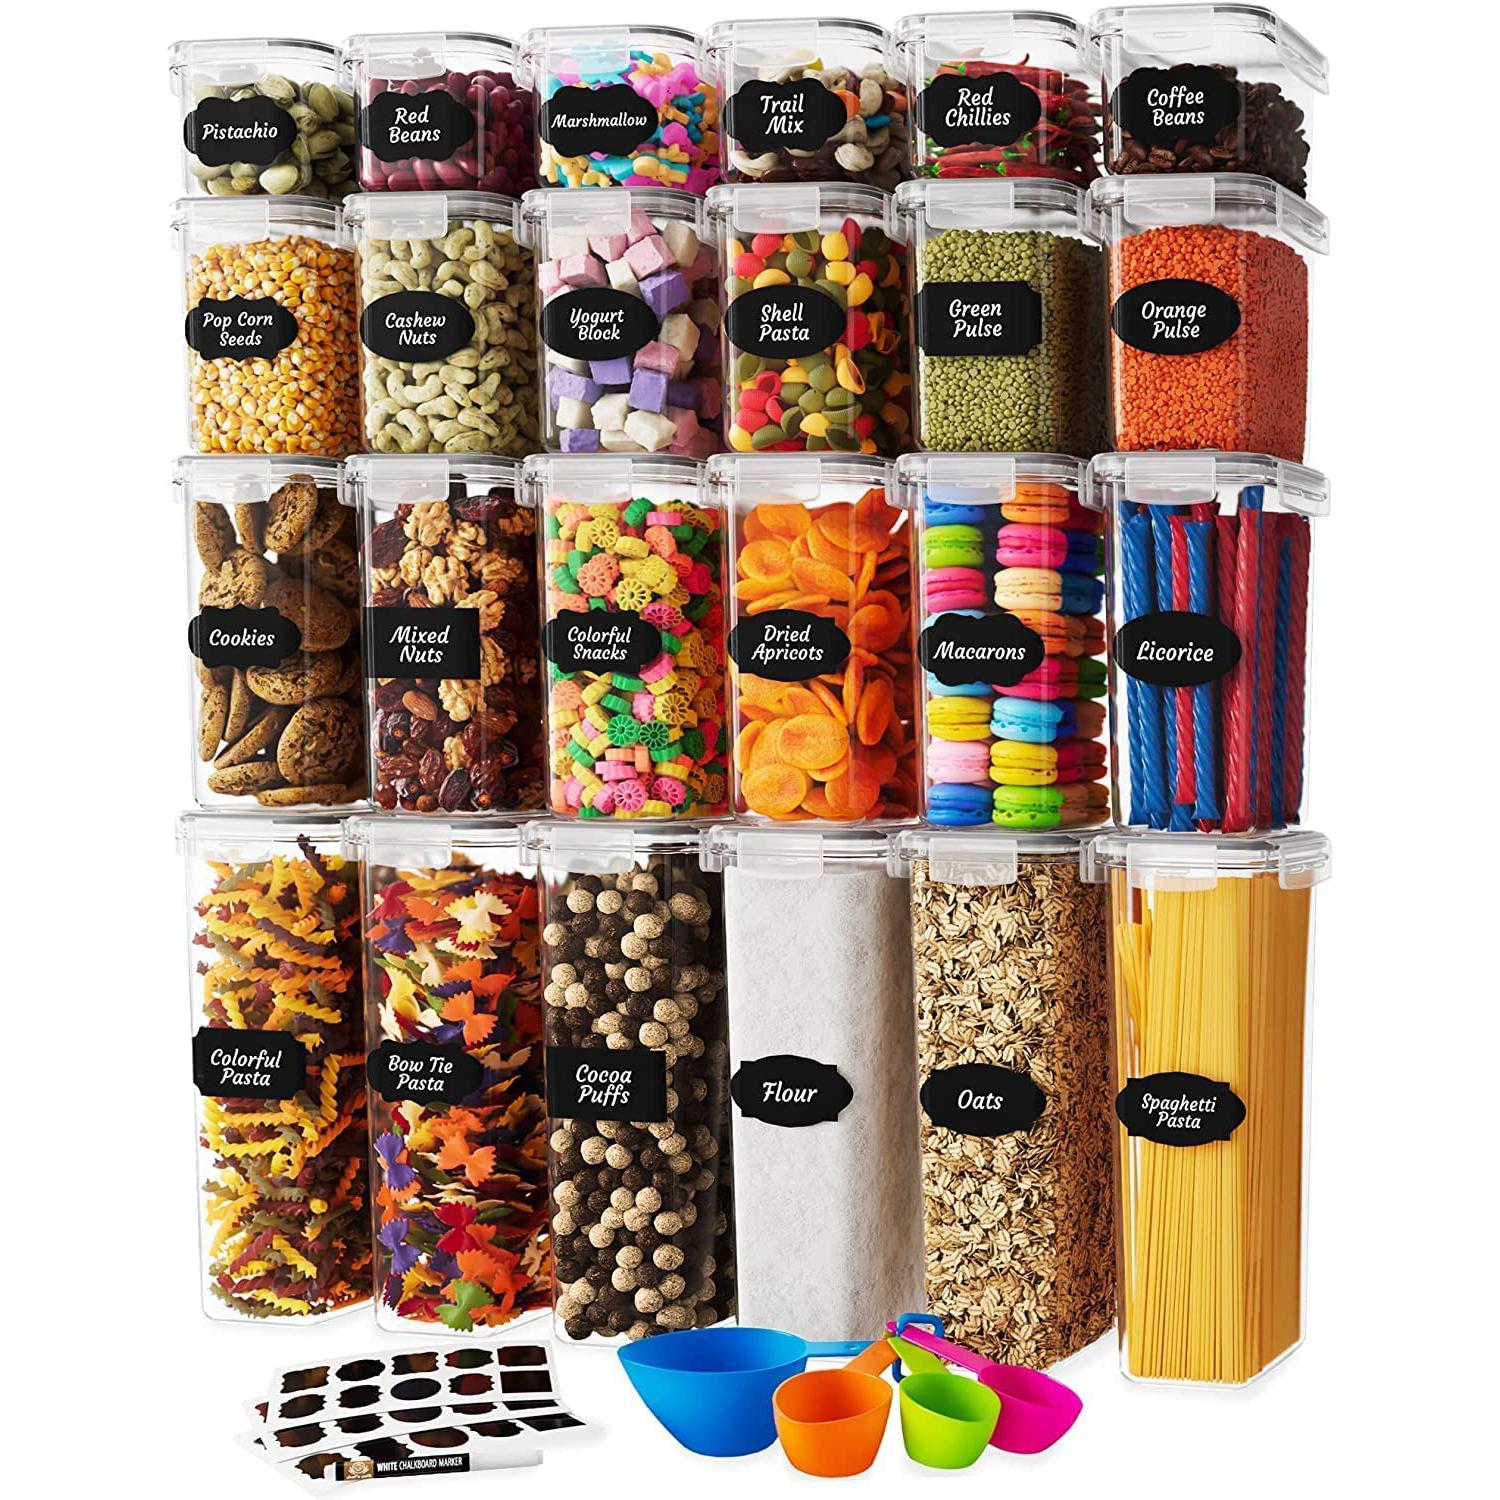 Airtight Food Storage Containers Set with Lids 24-Pack for $38.64 Shipped